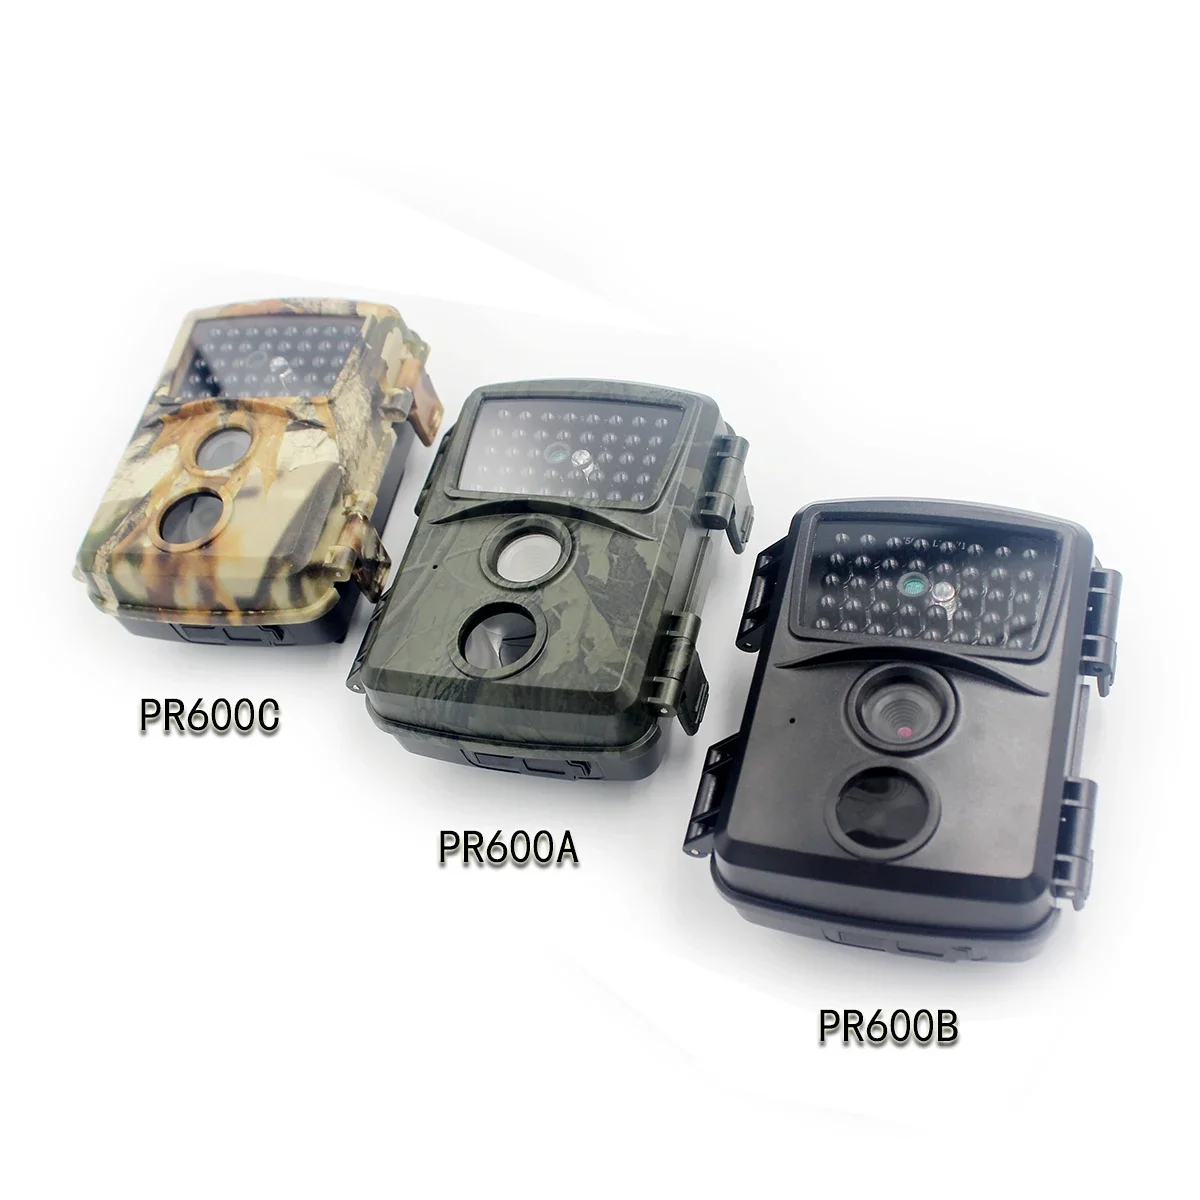 

1080P HD Video Trail Game Camera Wildlife Observation Farm Security 0.8s Trigger Time Night Vision Hunting Scouting Camera PR600